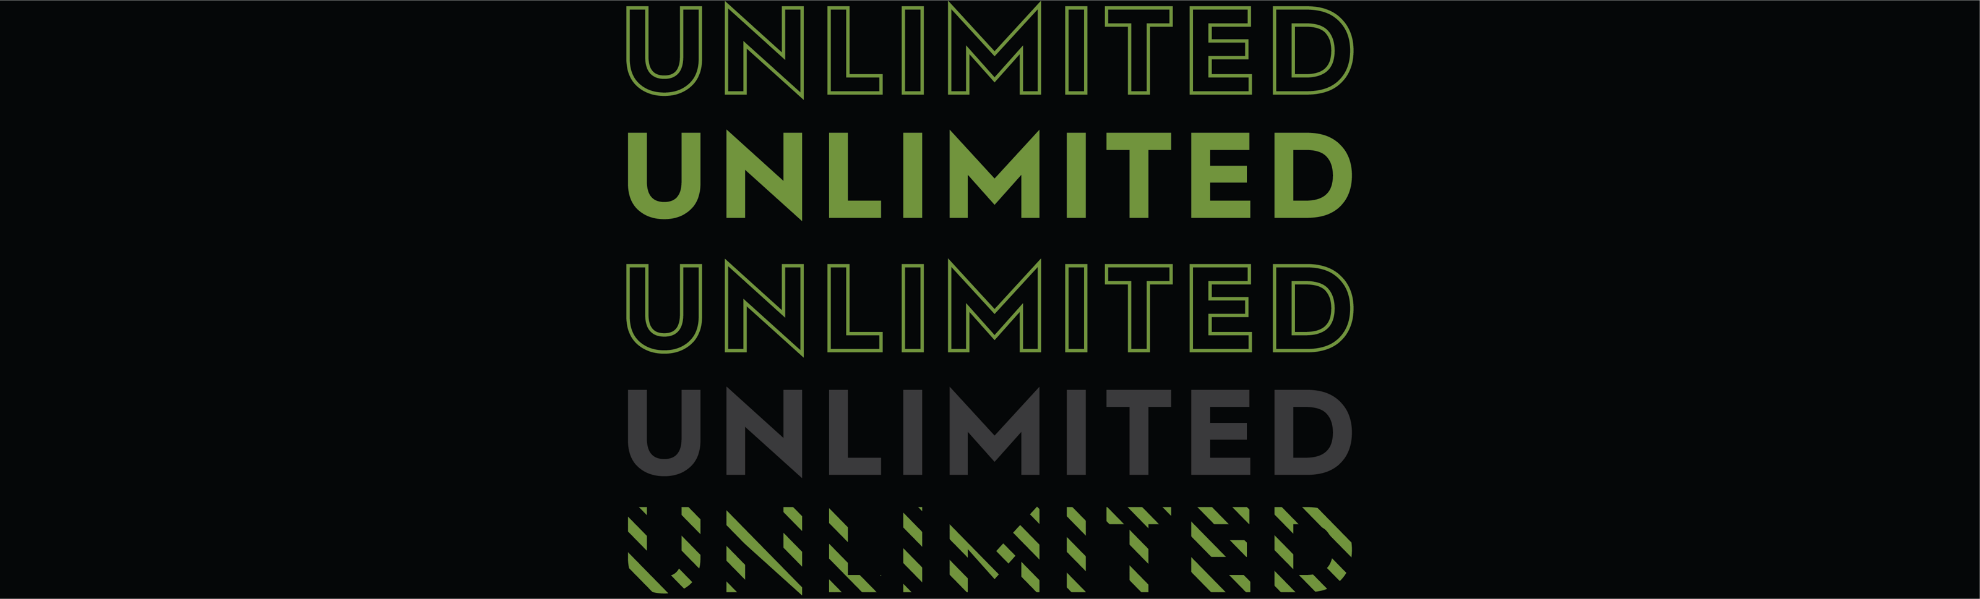 Unlimited Pass Image 